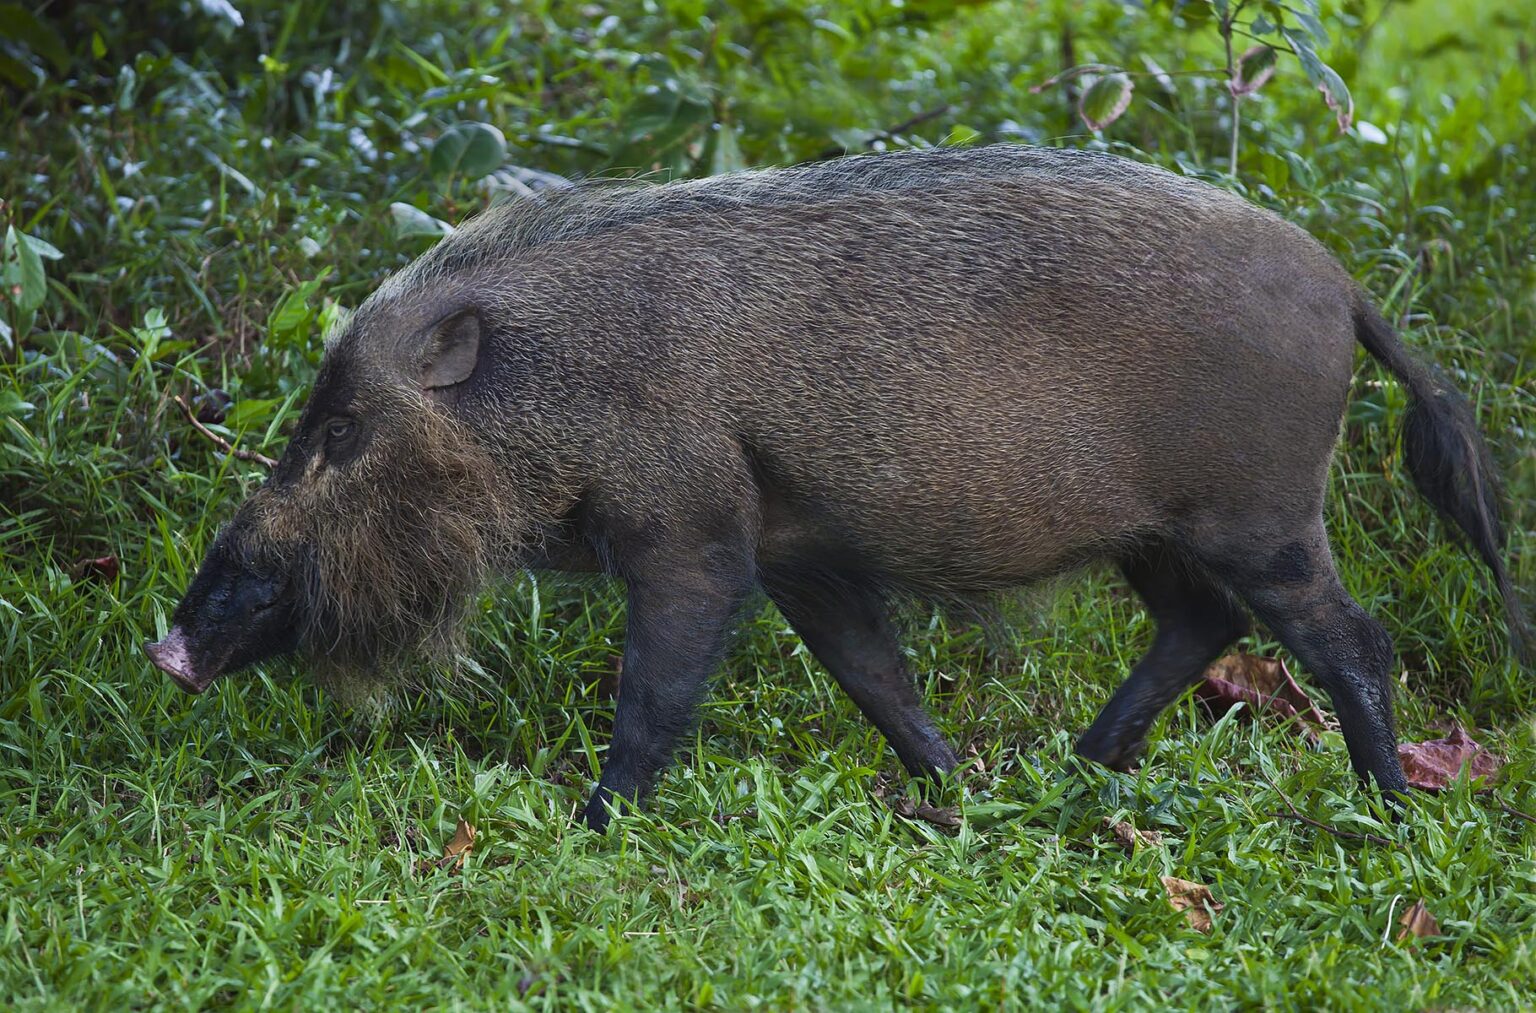 A BORNEON BEARDED PIG (Sus barbatus) living in BAKO NATIONAL PARK which is located in SARAWAK - BORNEO, MALAYSIA